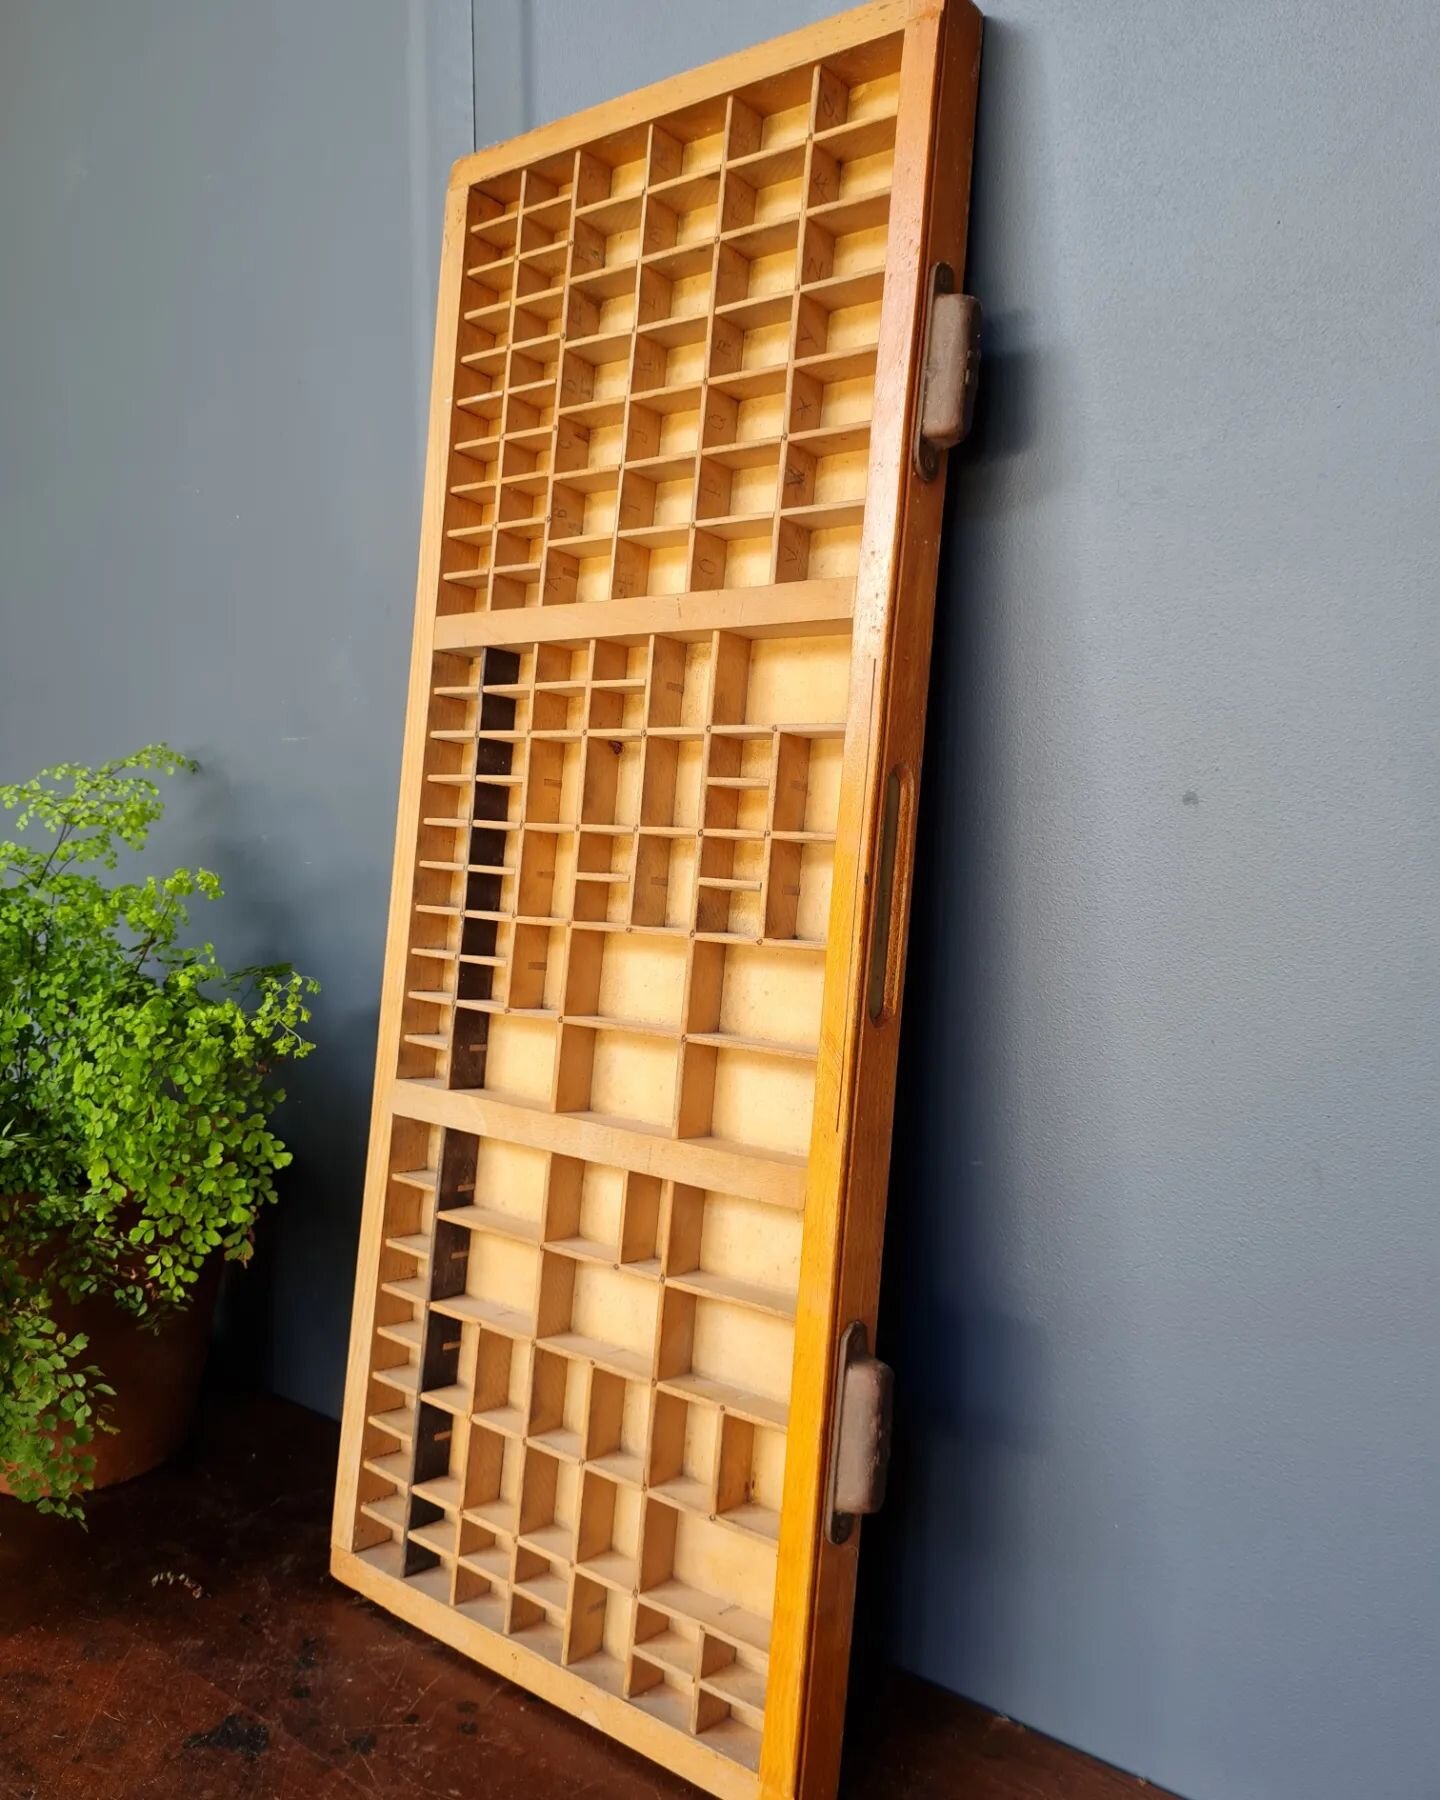 Vintage printers tray.&nbsp; Lots of little partitions.&nbsp; It measures 833mm x 330mm x 37mm. $130
Postage $18.95 Australia wide.
Comment sold to purchase &amp; we will reply &amp; message to confirm.

We are always happy to combine postage.